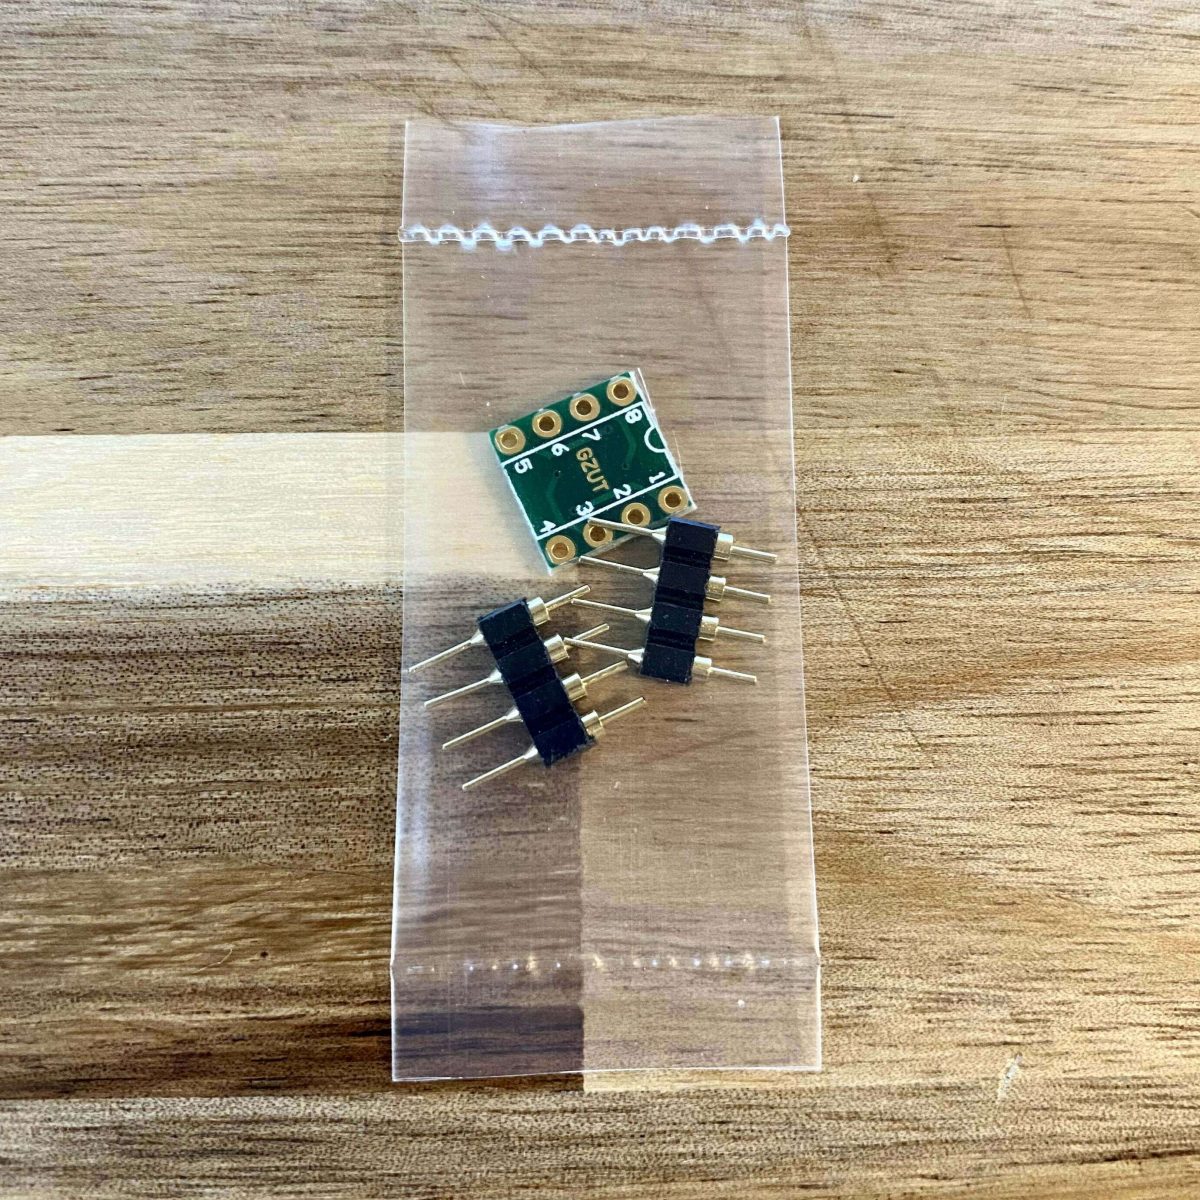 SOIC8 to DIP8 Adapter Back Side